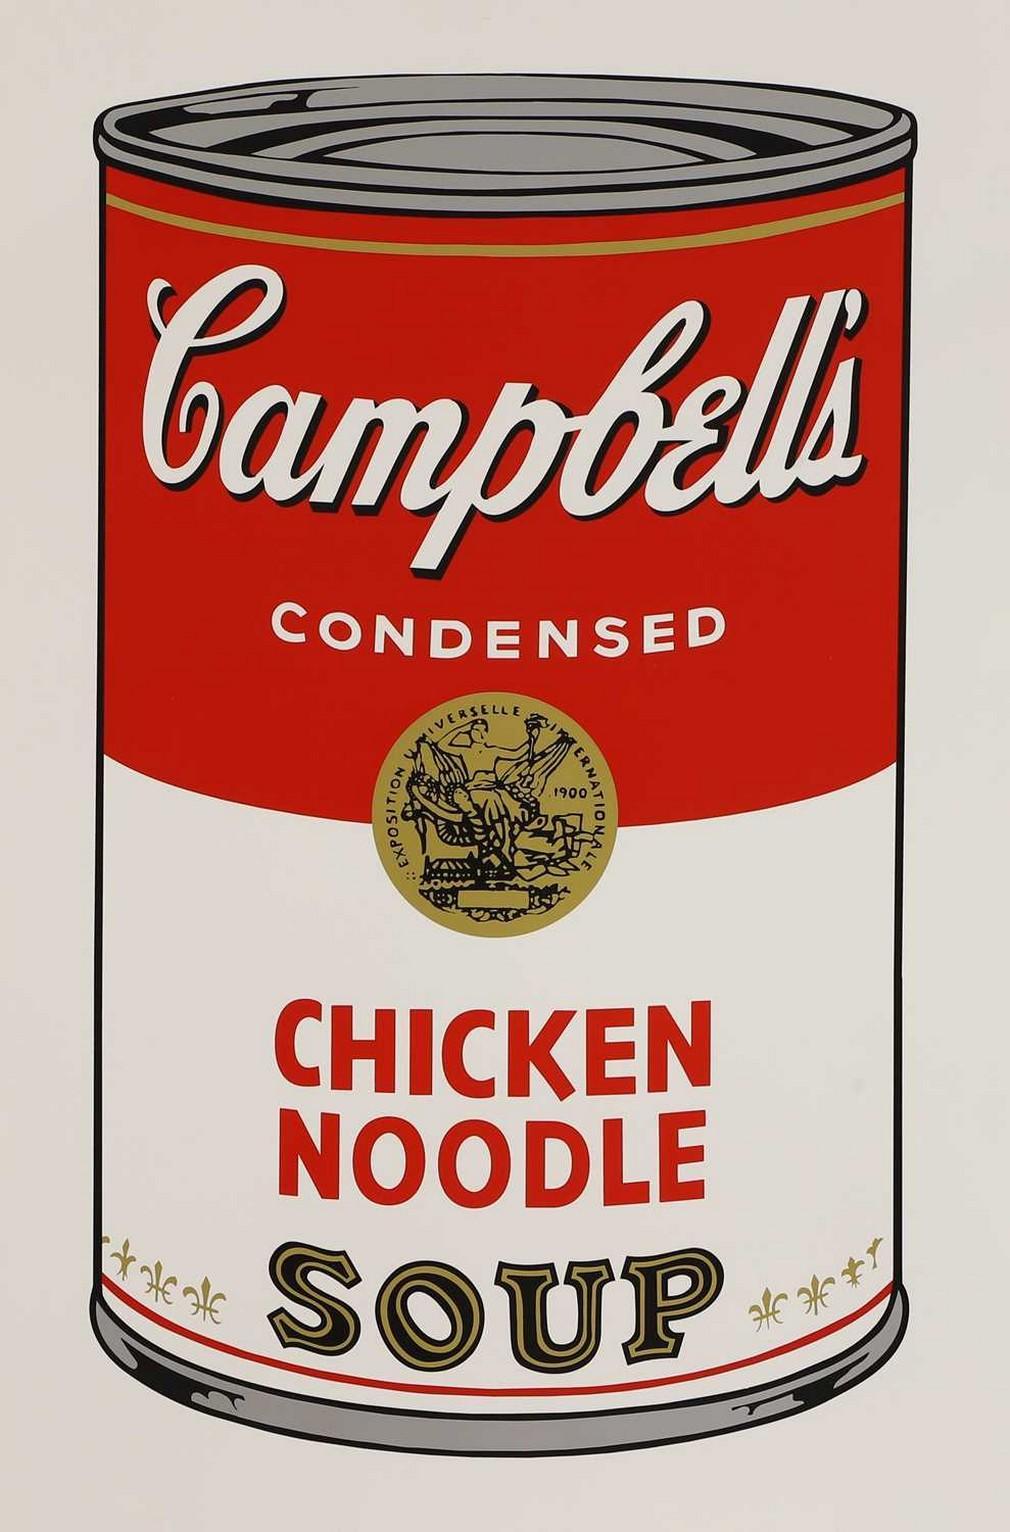 (after) Andy Warhol Figurative Print - Campbells Soup - Chicken Noodle